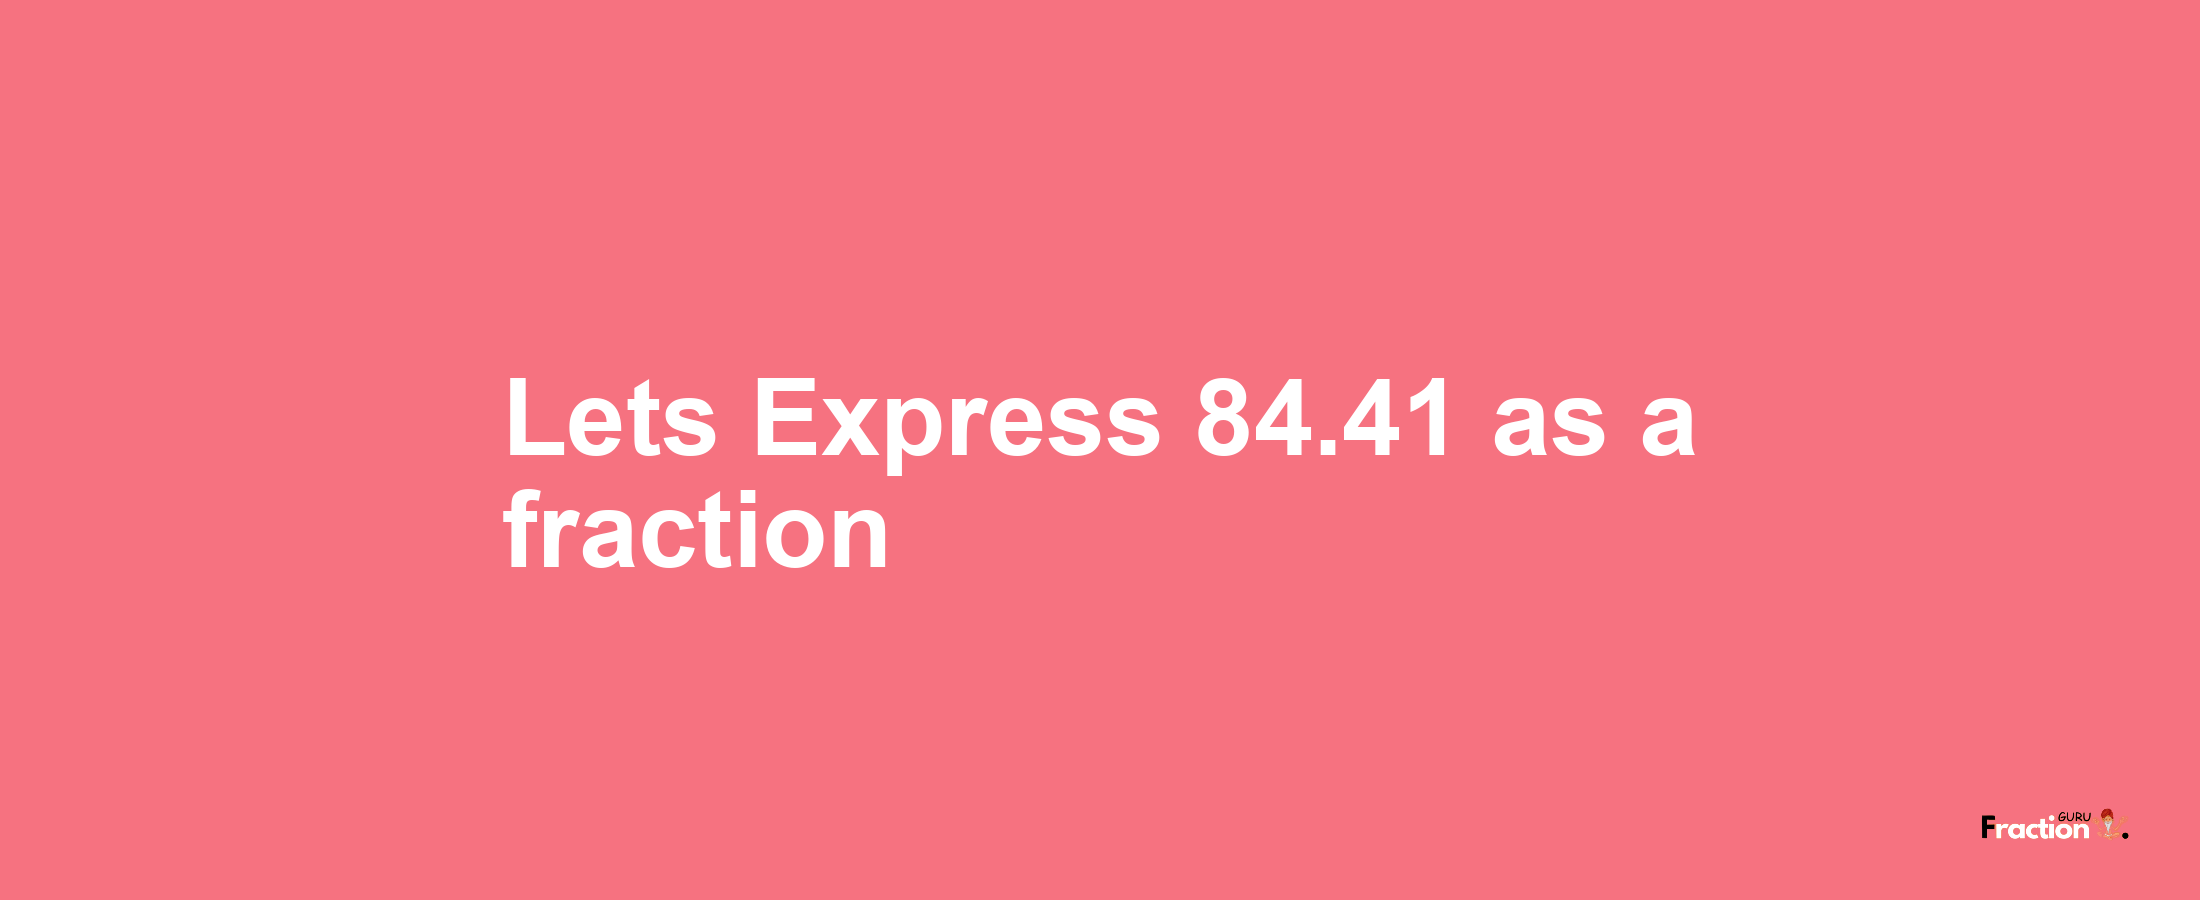 Lets Express 84.41 as afraction